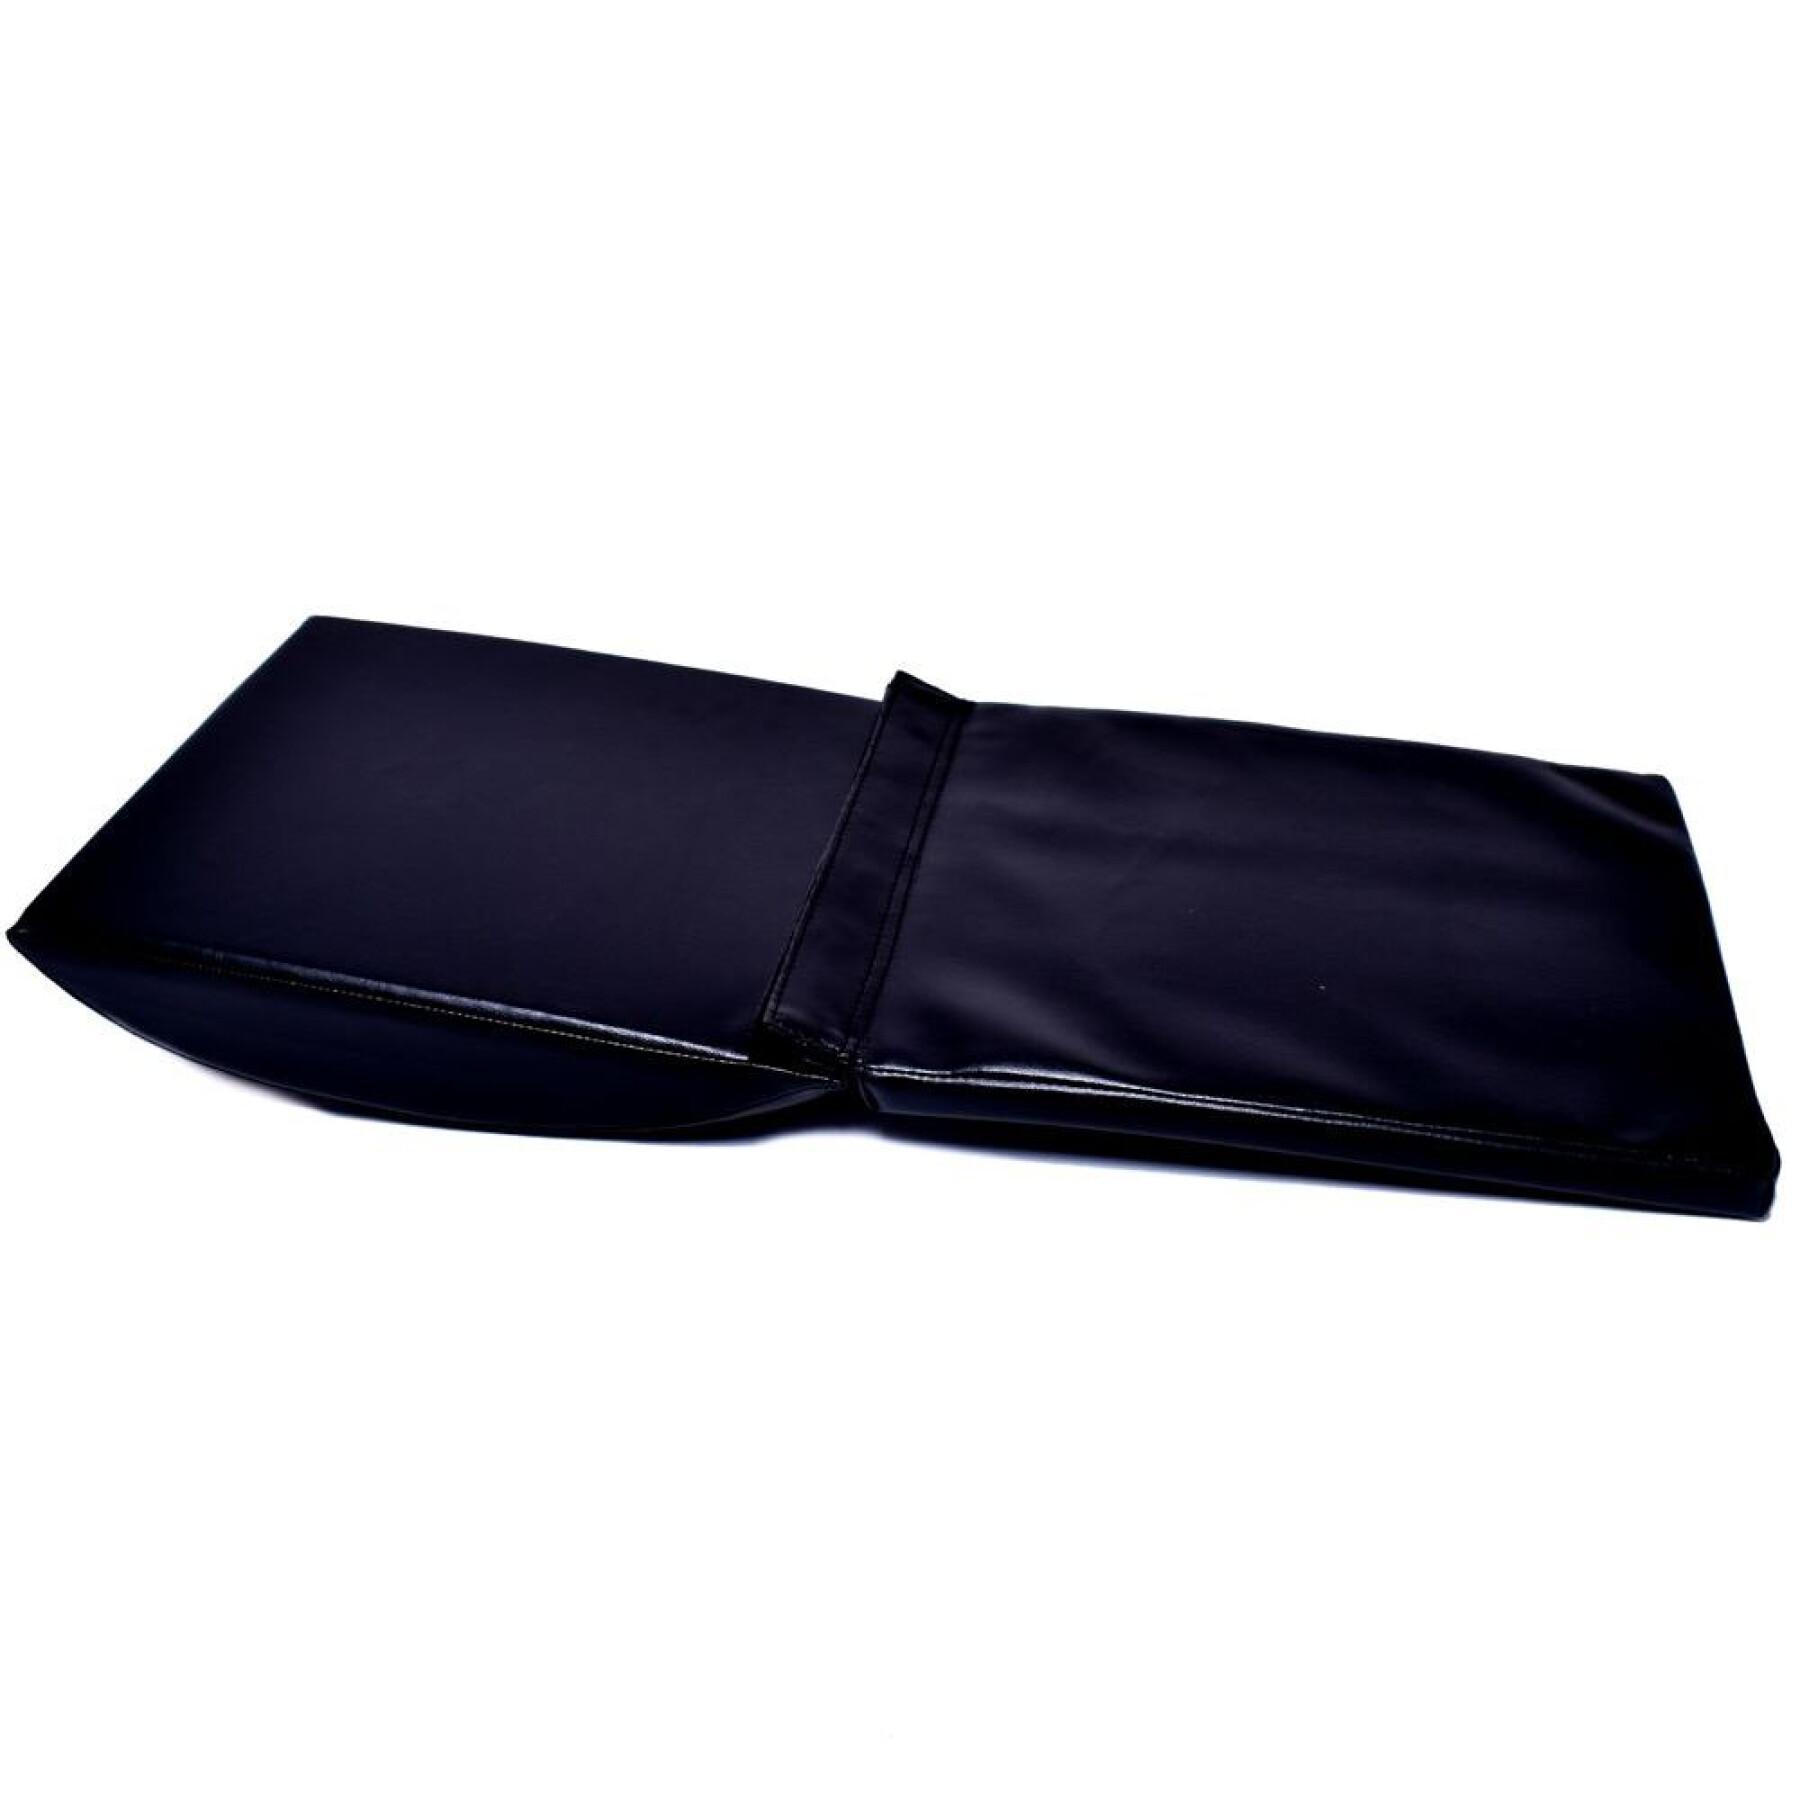 Coussin pour abdominaux Booster Fight Gear Abmat